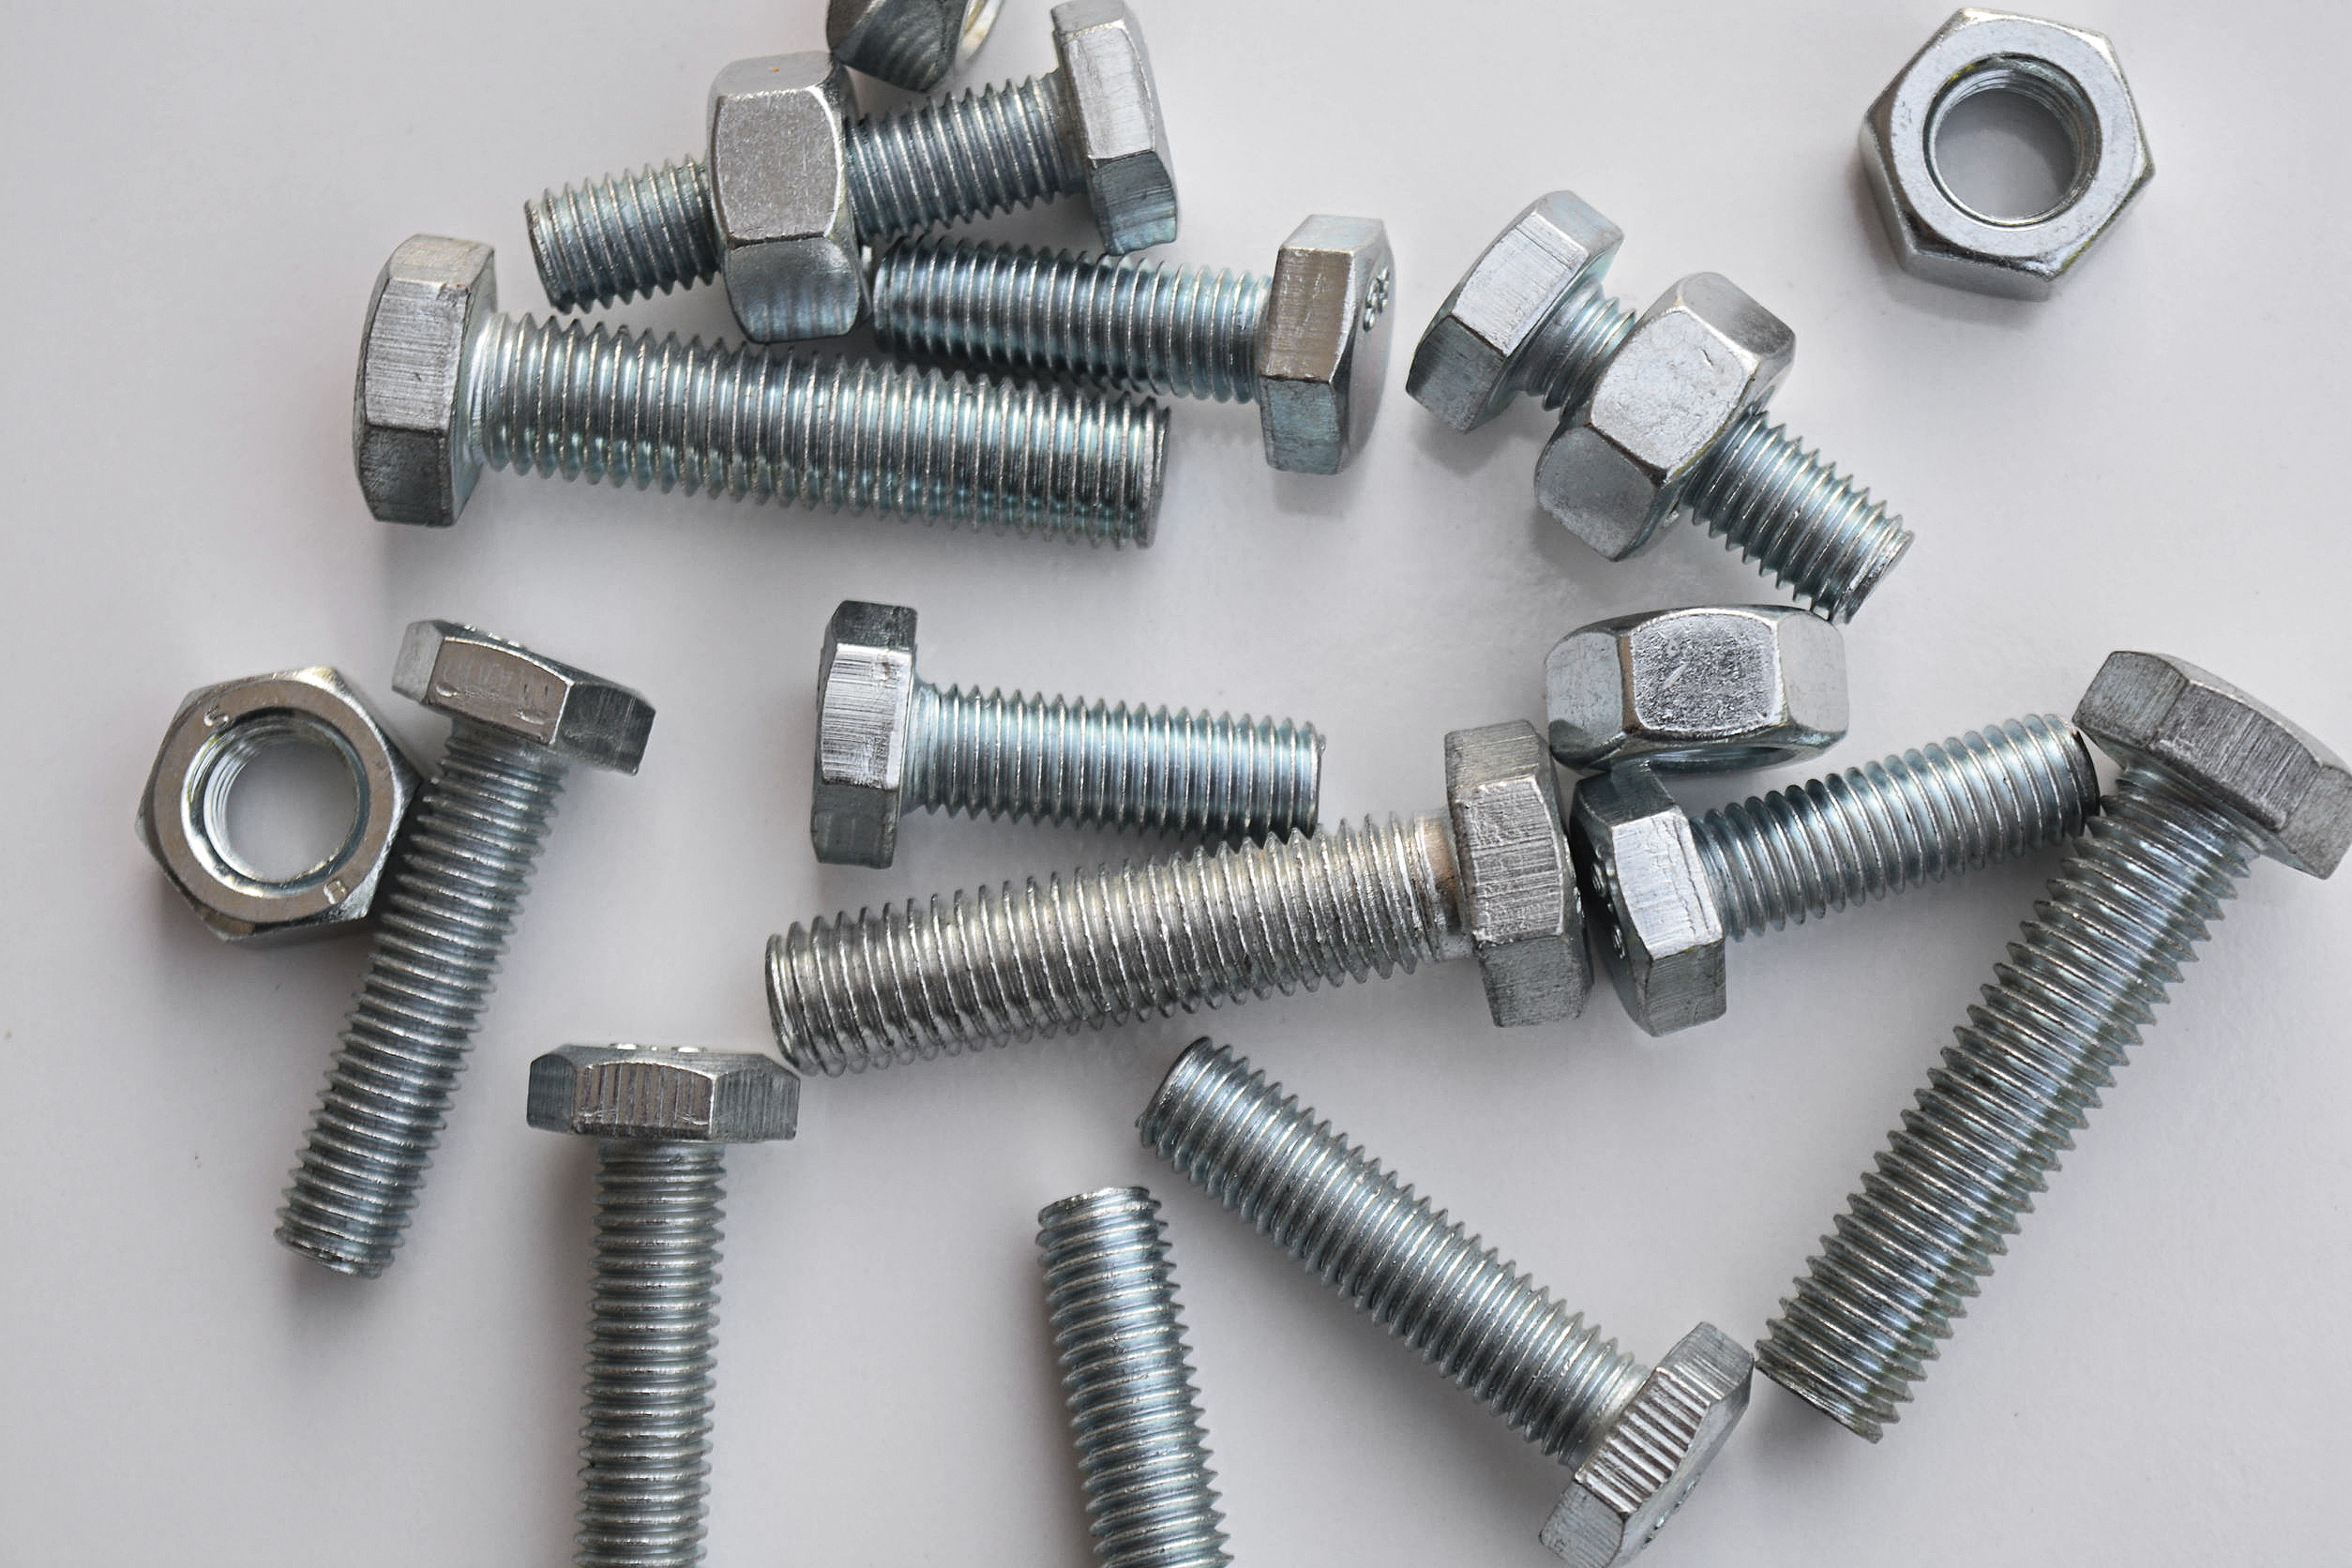 How bolts are made? Here is the manufacturing process